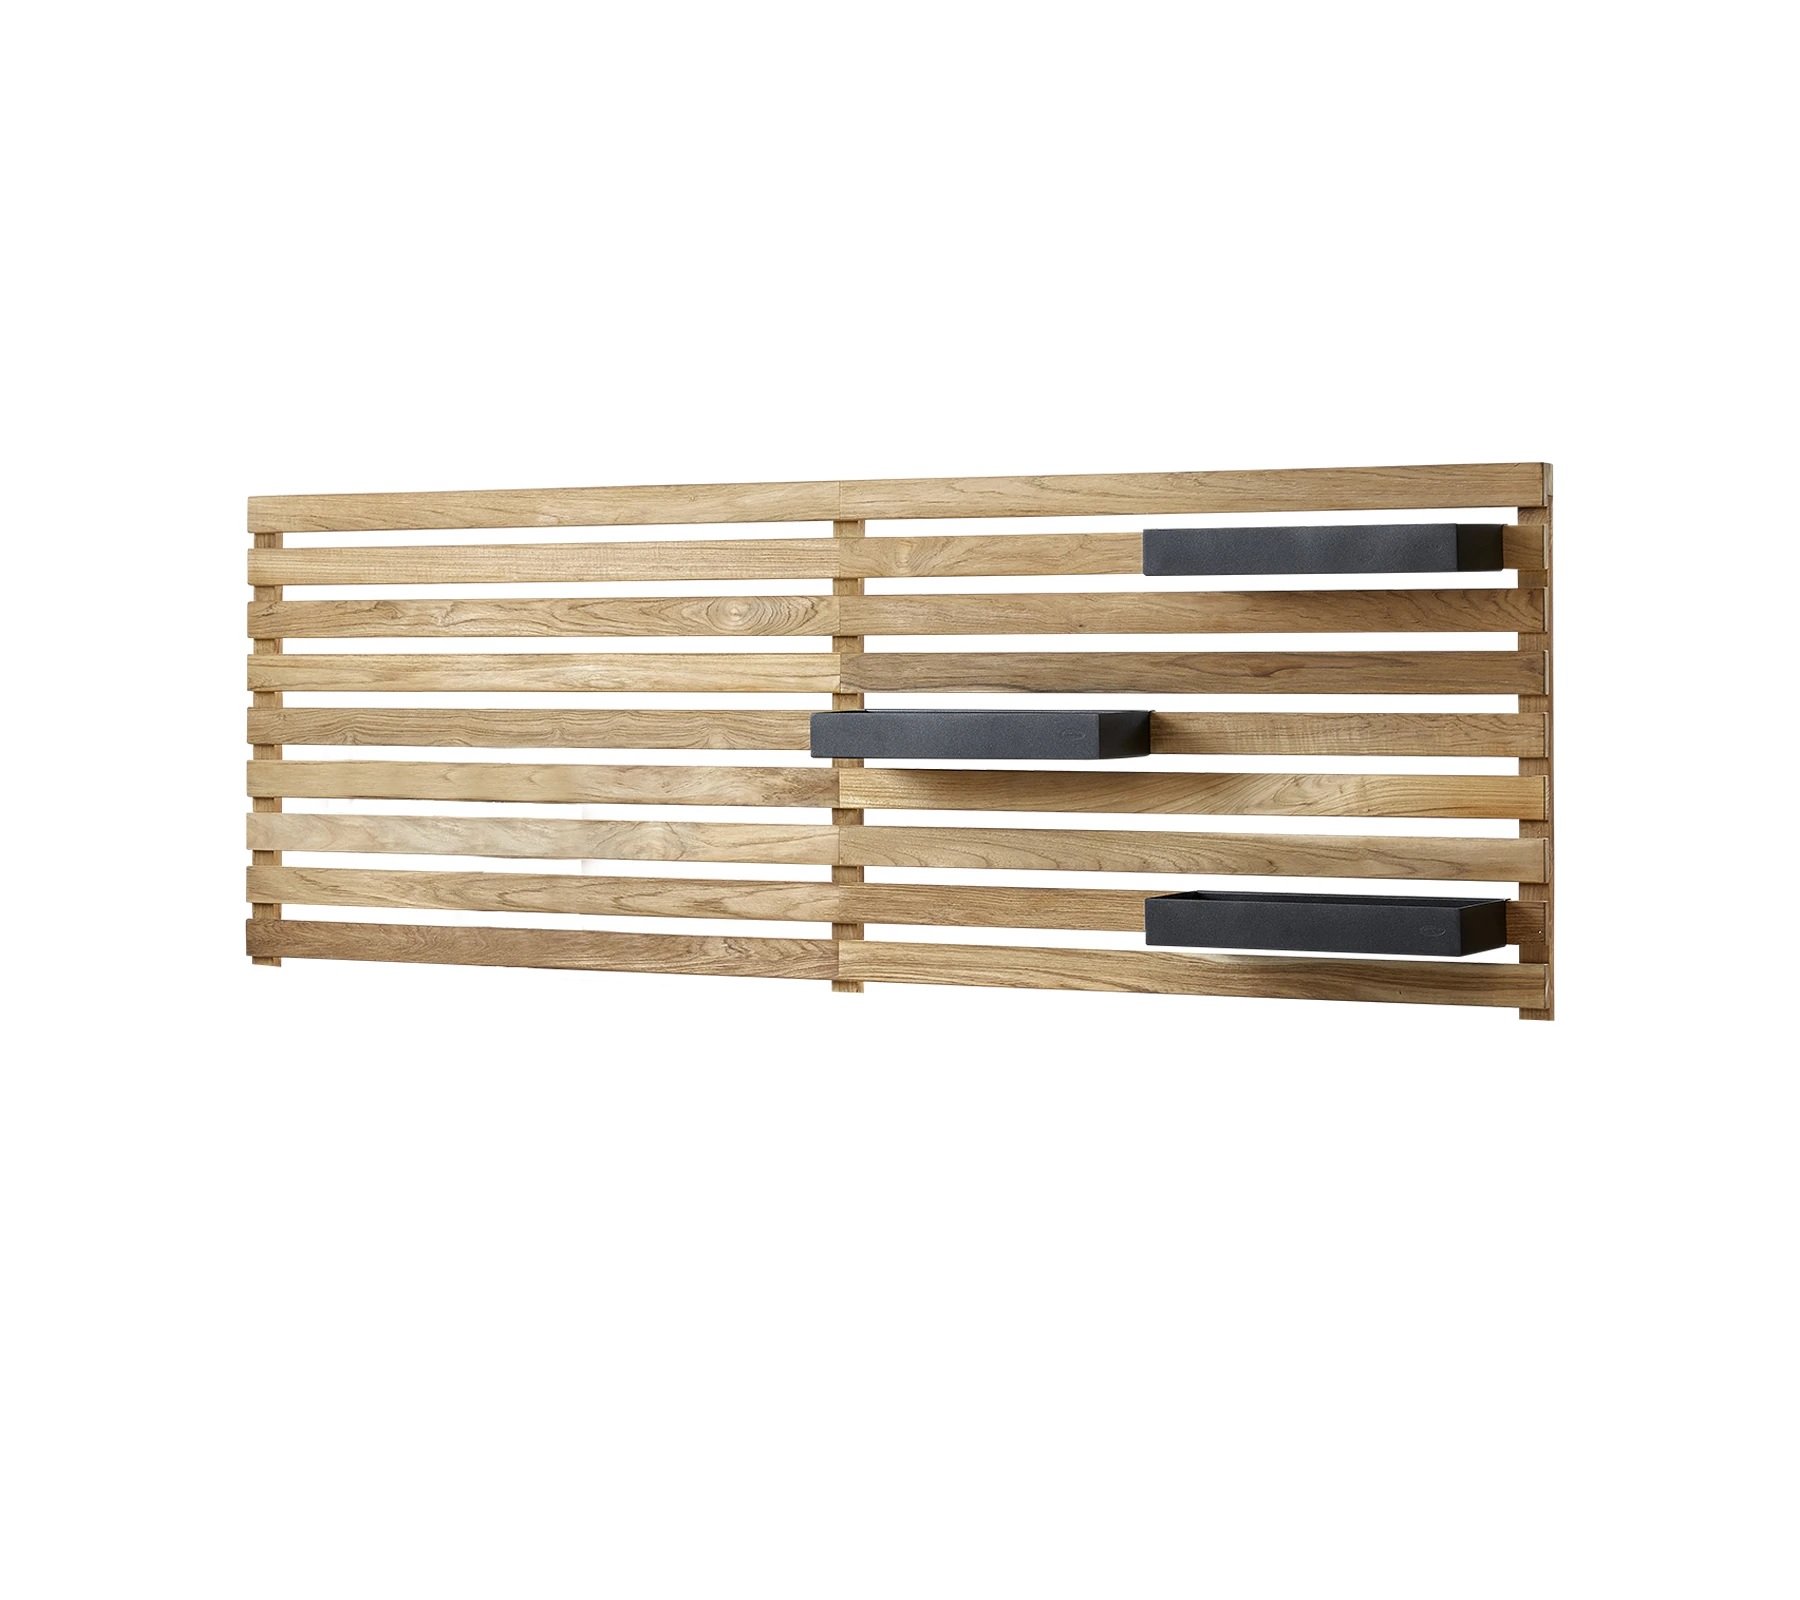 Teak Wall for Drop Kitchen accessory from Cane-line, designed by Cane-line Design Team